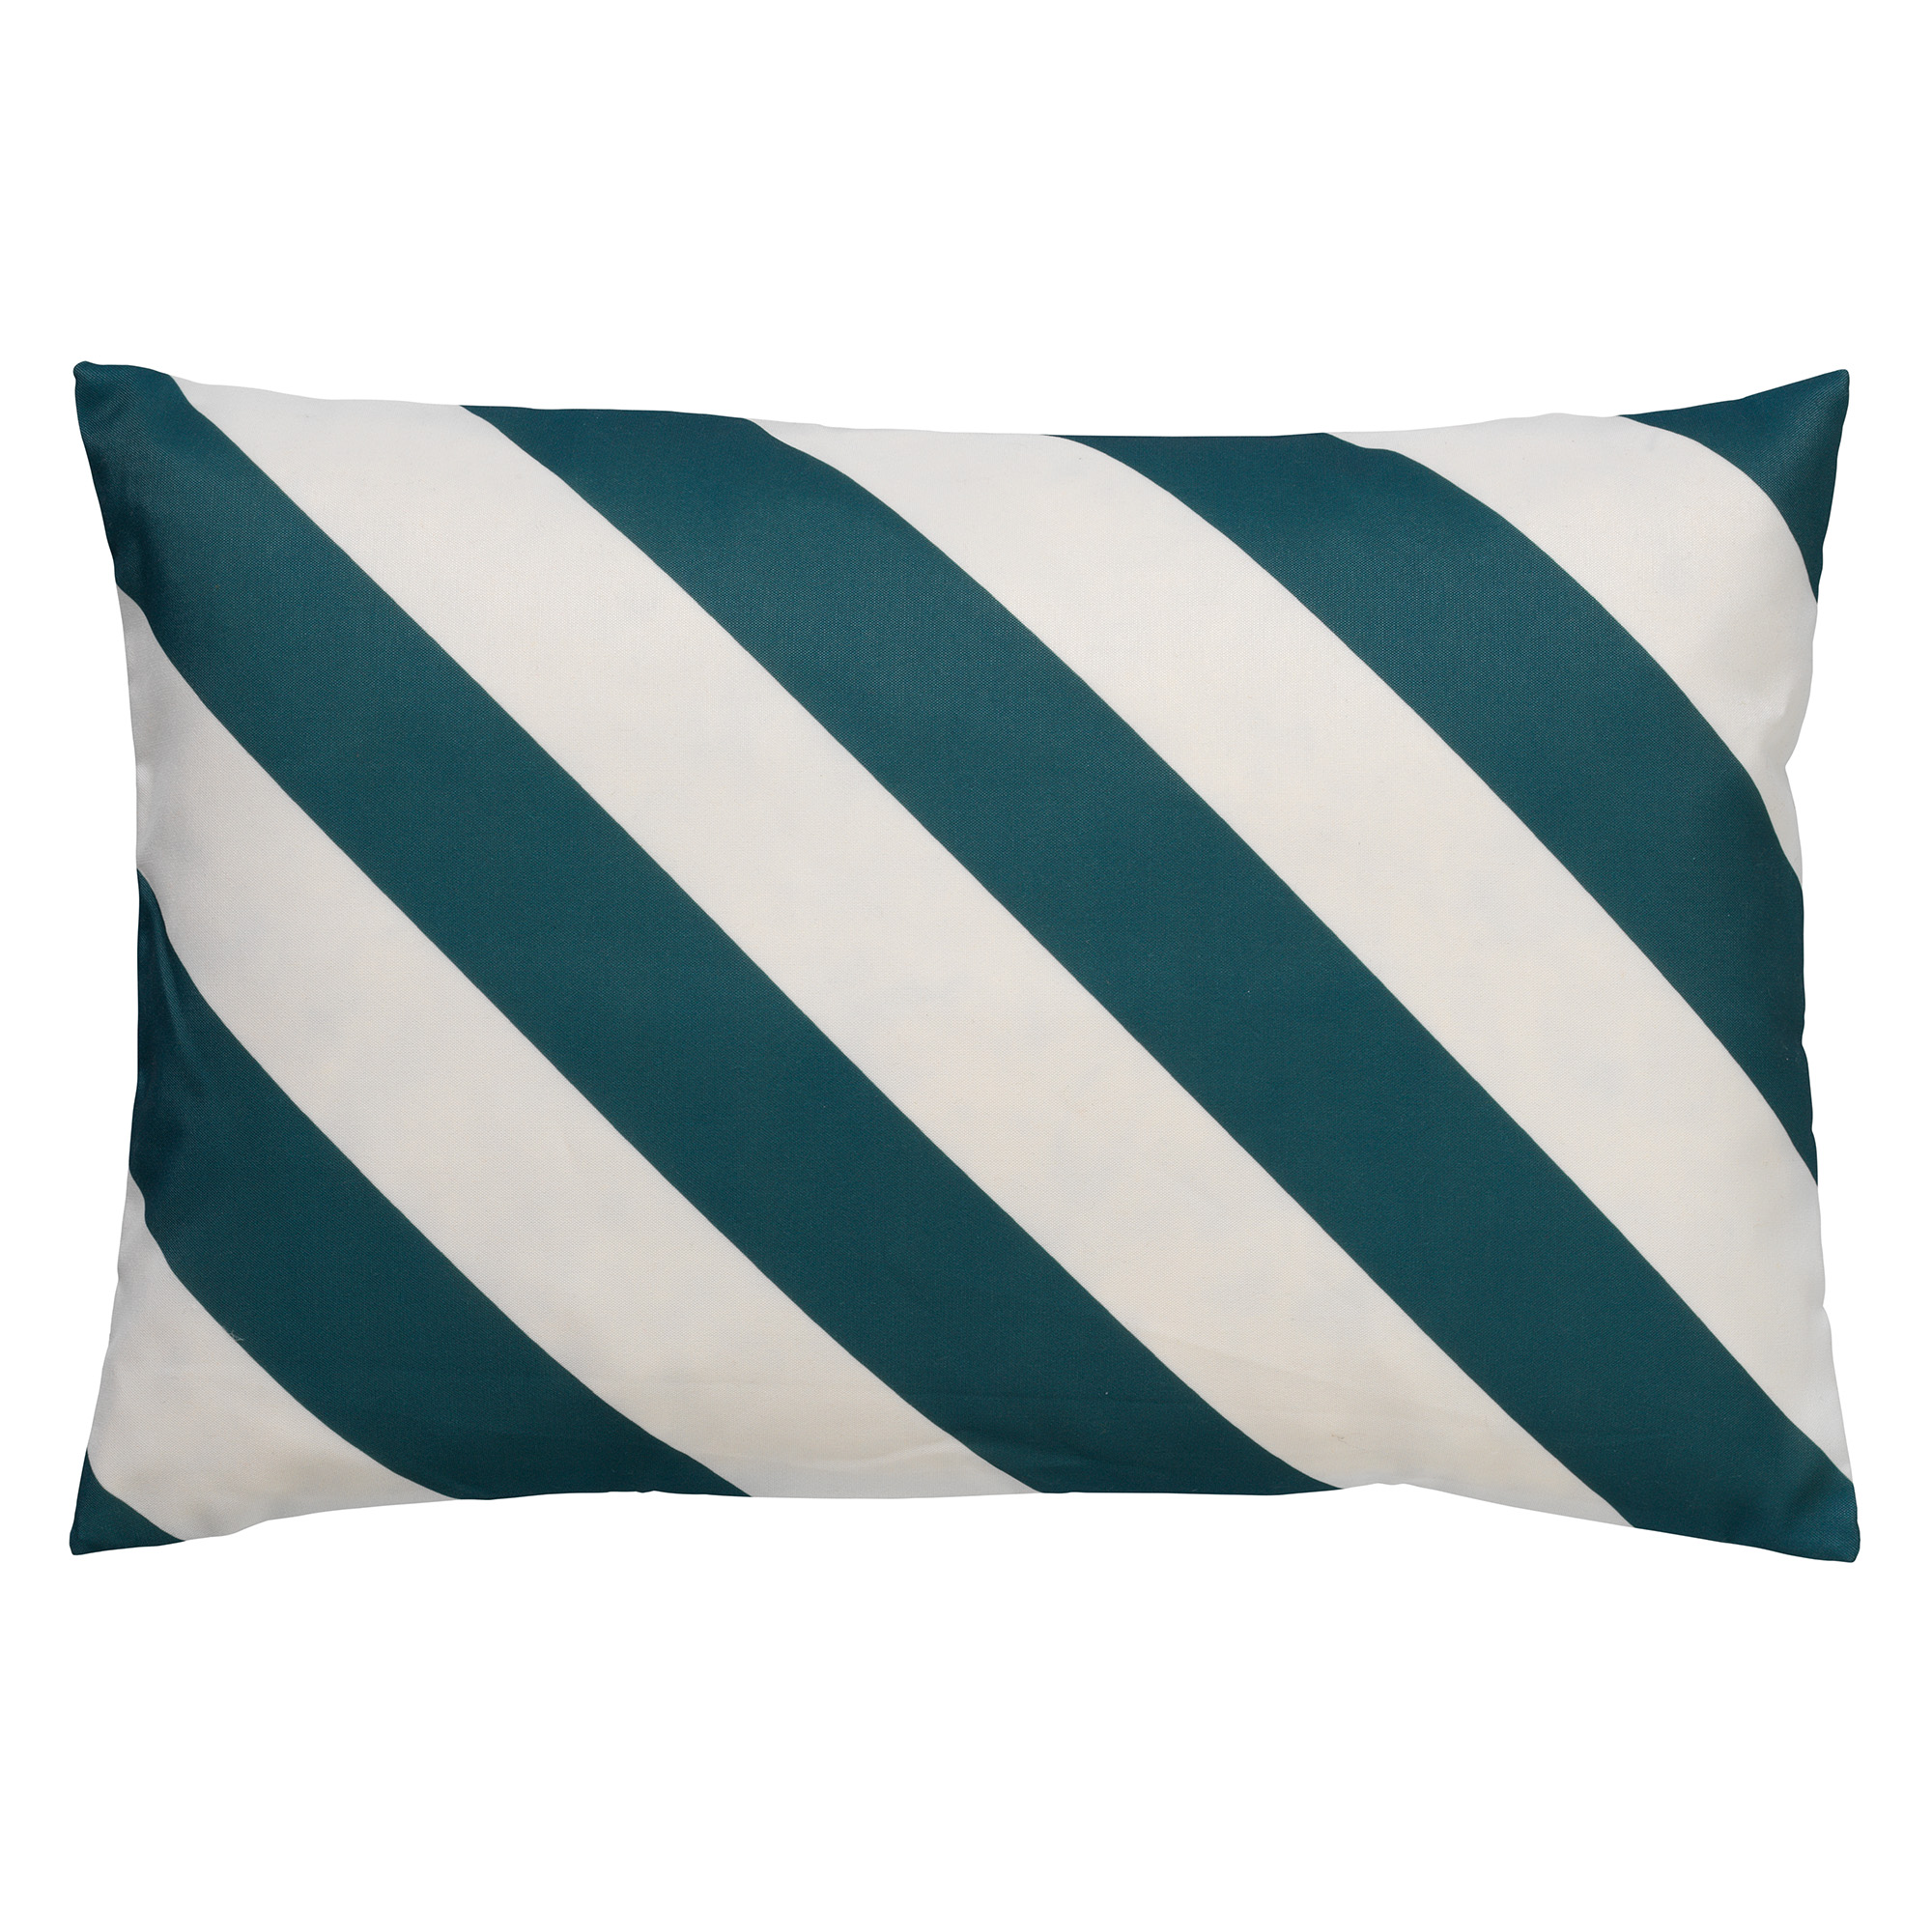 Cushion Sanzeno 40x60 cm  Sagebrush Green - water-repellent and UV-resistant -striped - white and  Green